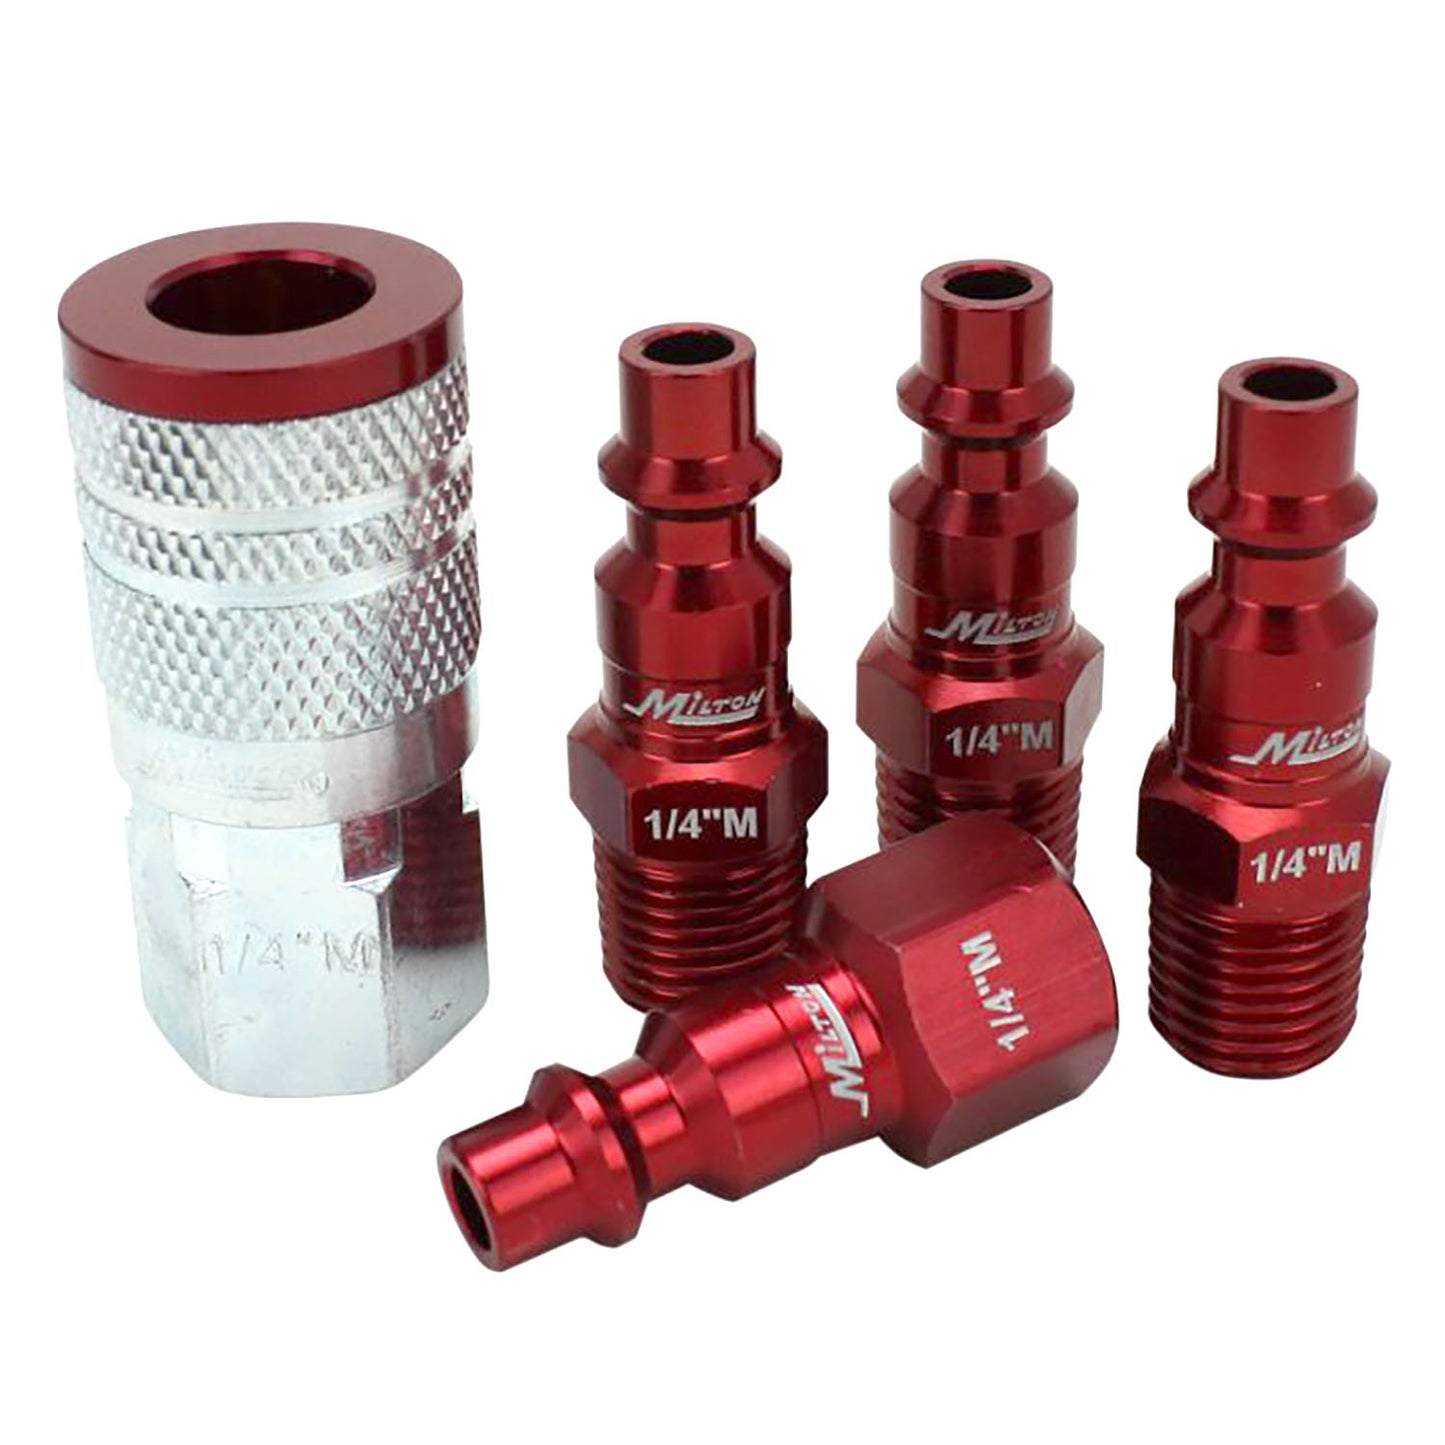 Milton ColorFit M Style coupler and Plug Kit 1/4" NPT 5 Pieces S-305MKIT Red